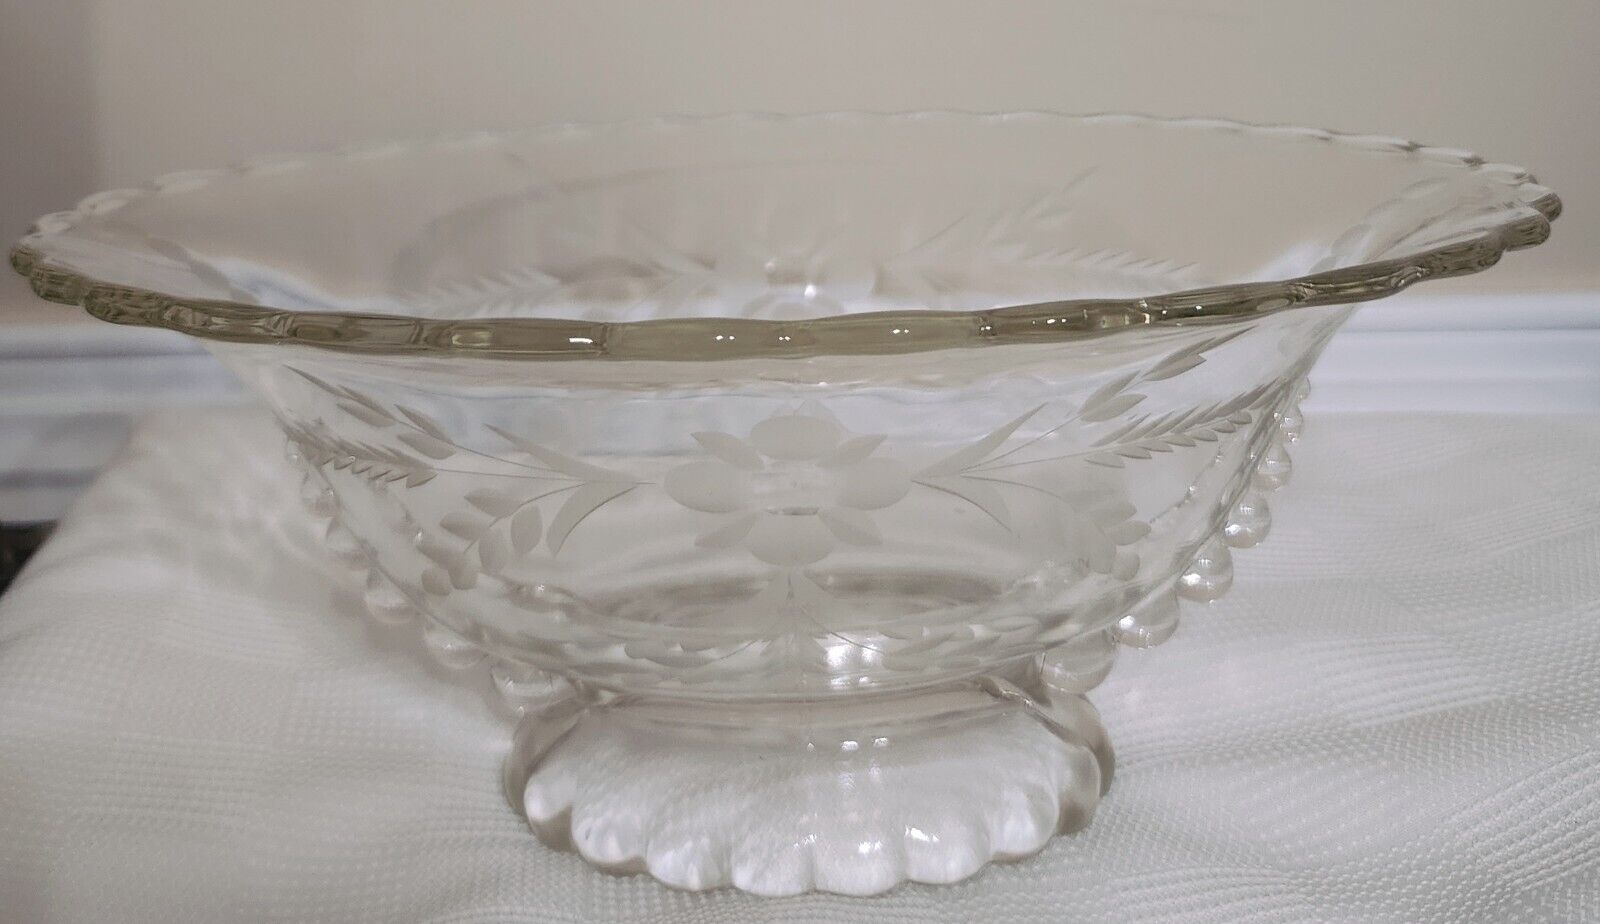 VTG Imperial Glass Co Candlewick scalloped footed,glass beads on the sides bowl 